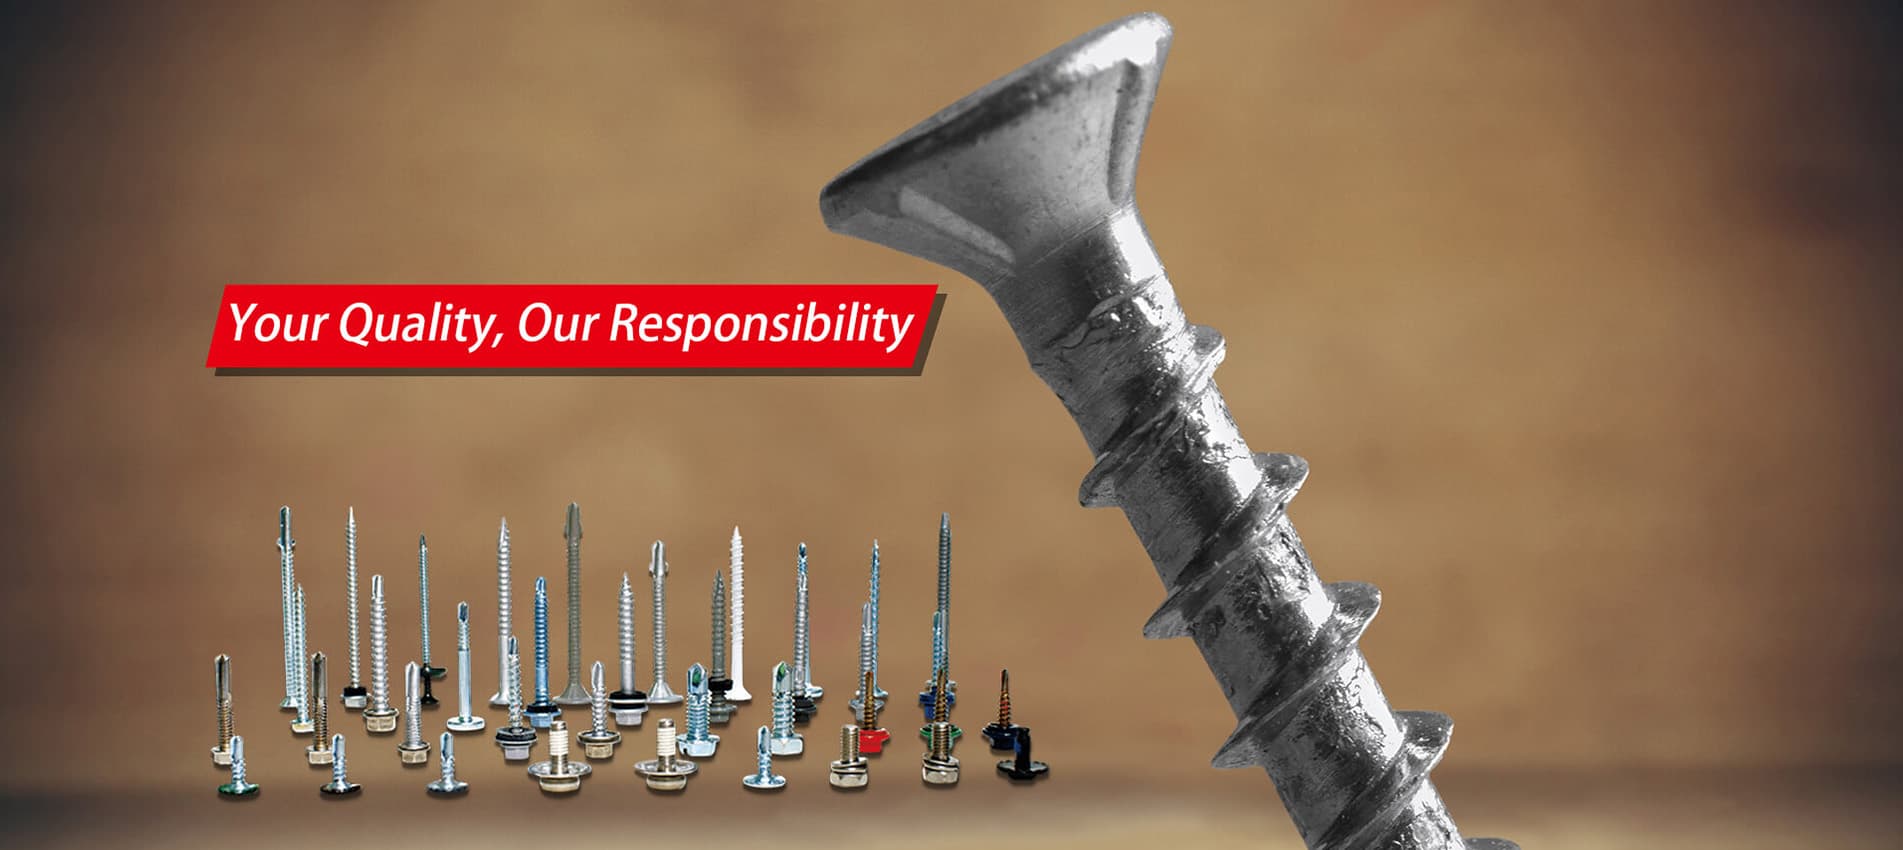 Your Quality, Our Responsibility